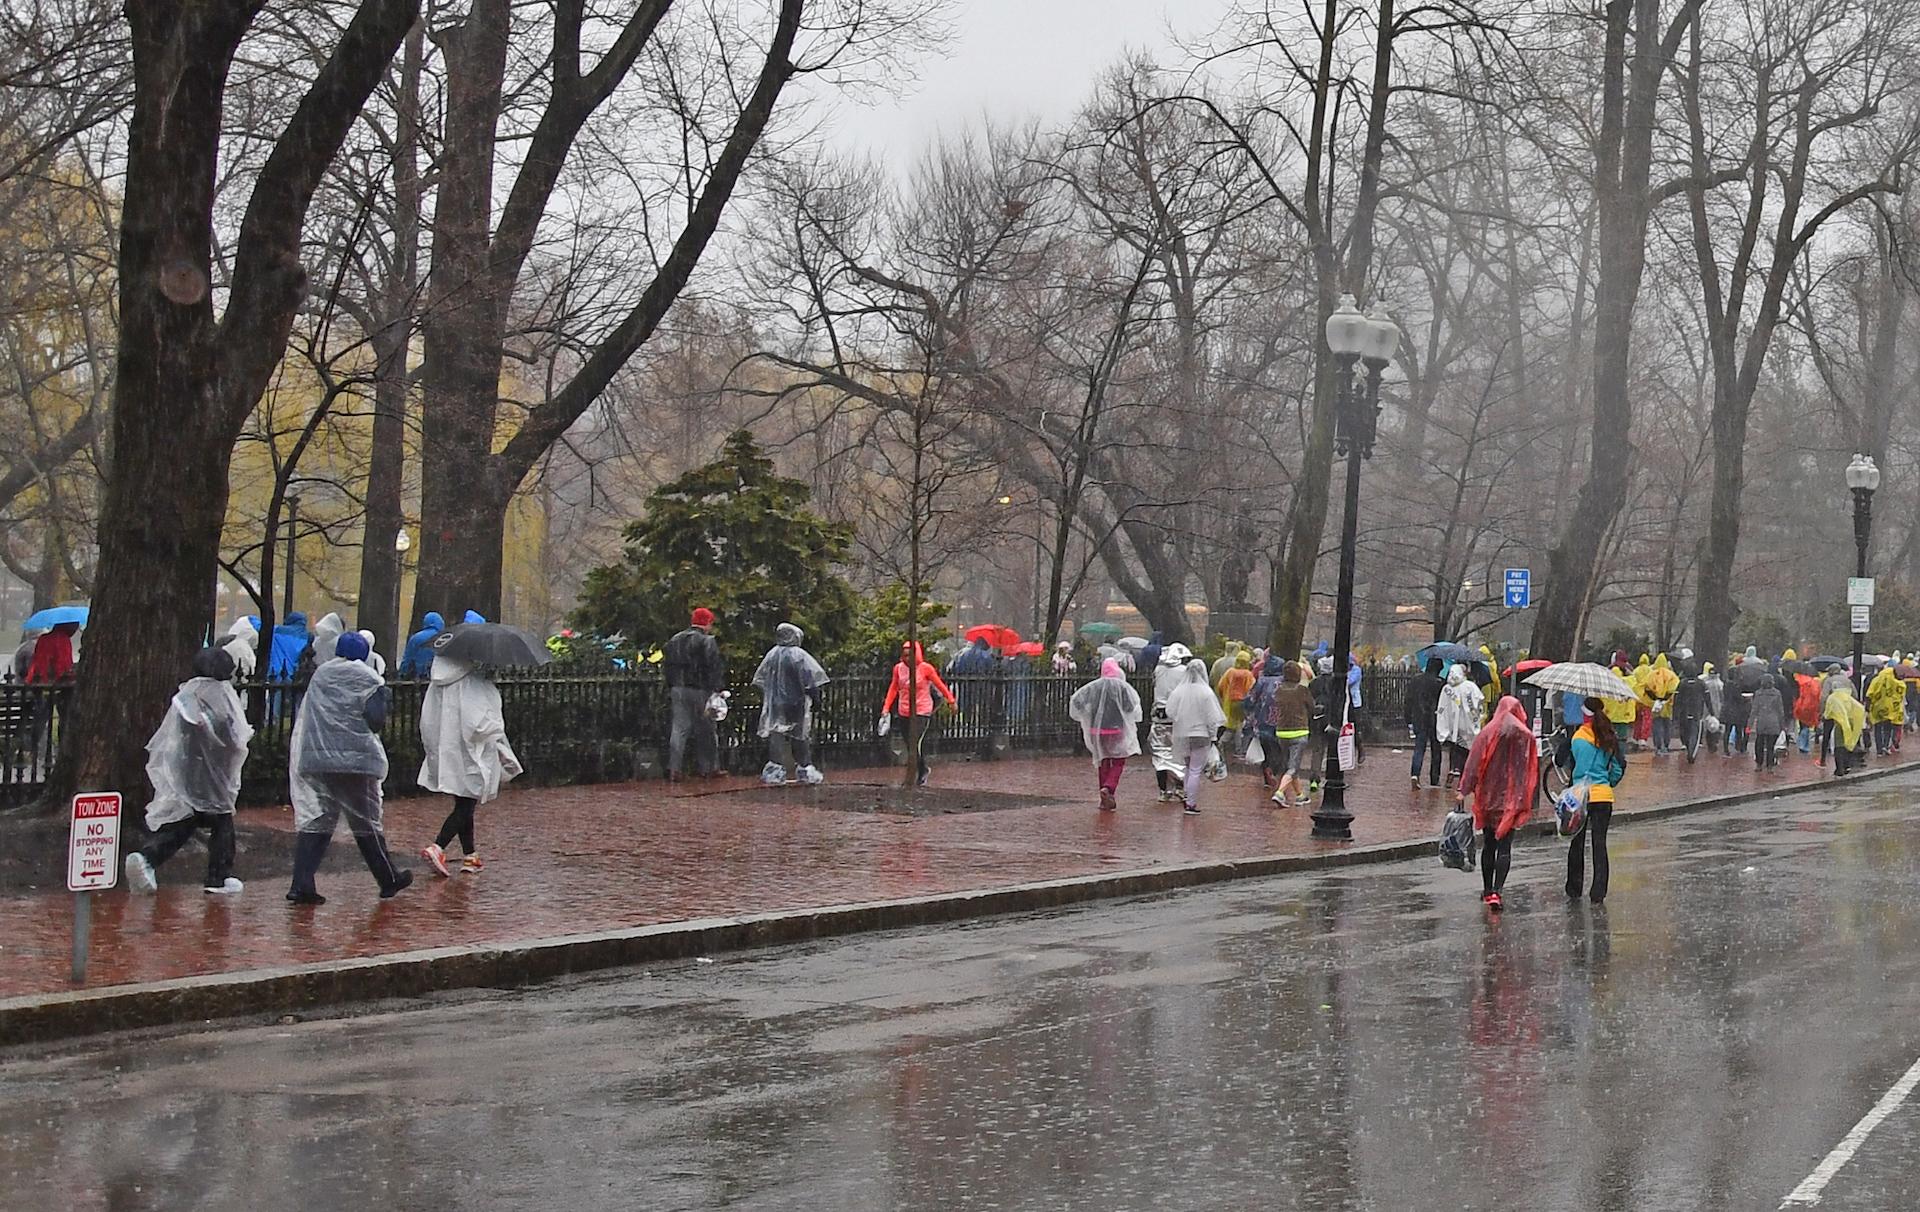 A rainy day, with umbrella-carrying pedestrians walking on the sidwalks flanking the public garden